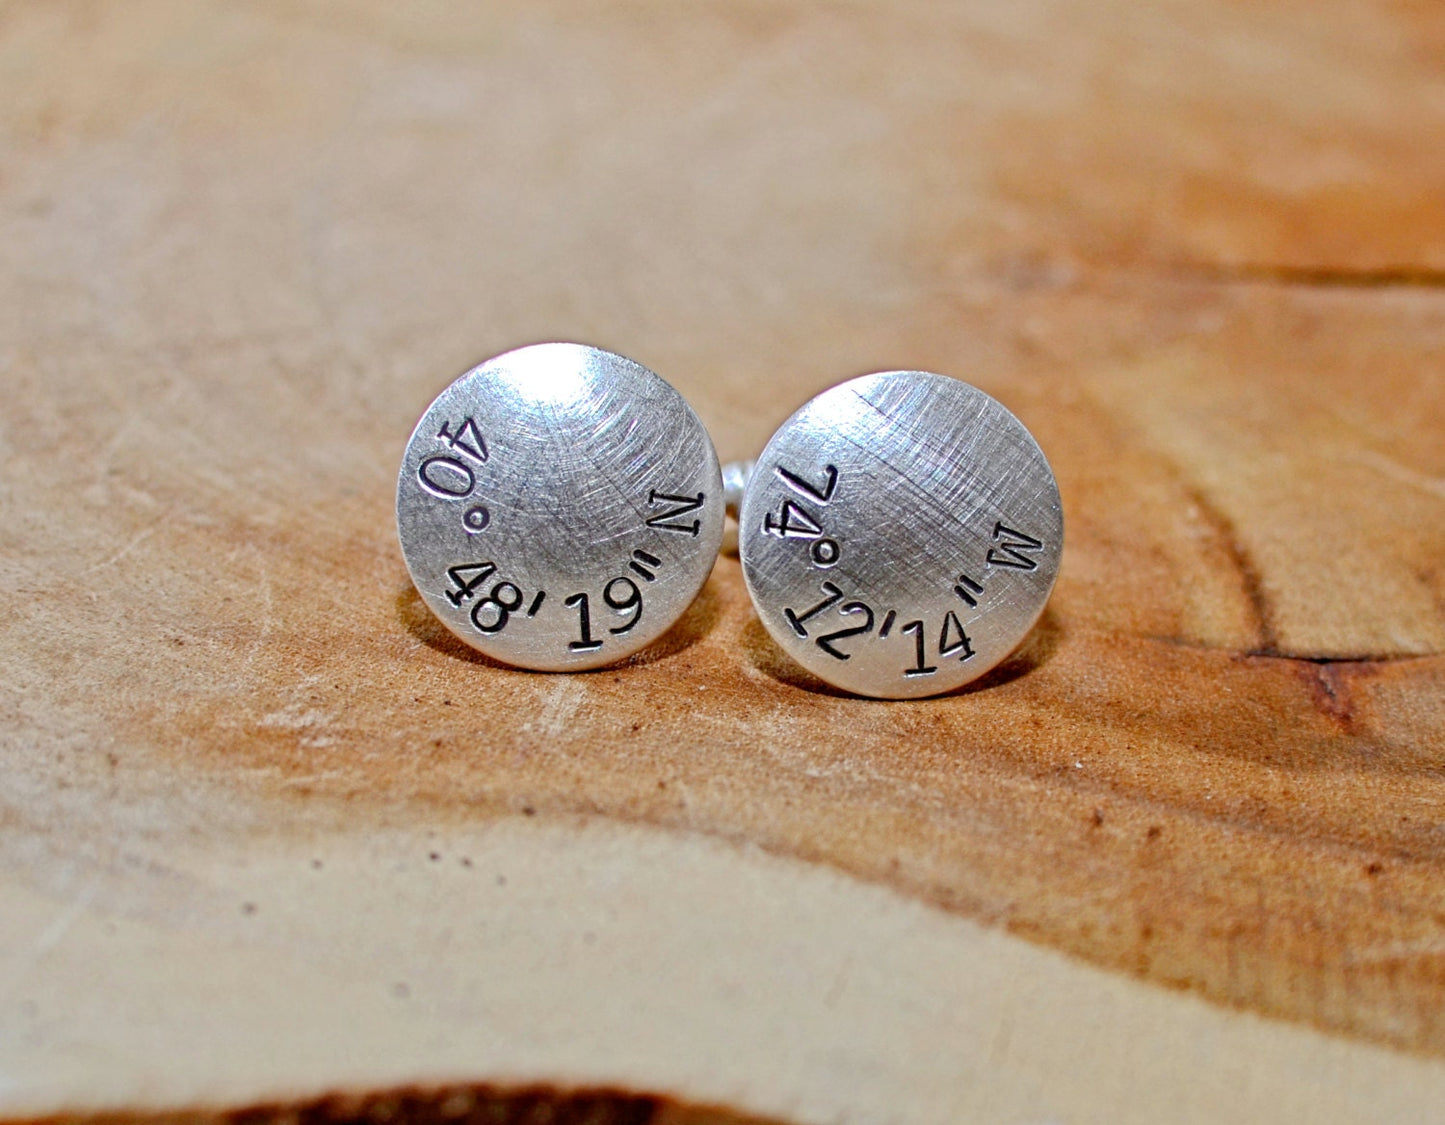 Sterling silver cuff links for silver anniversary or 25th anniversary with your special location - gps coordinates